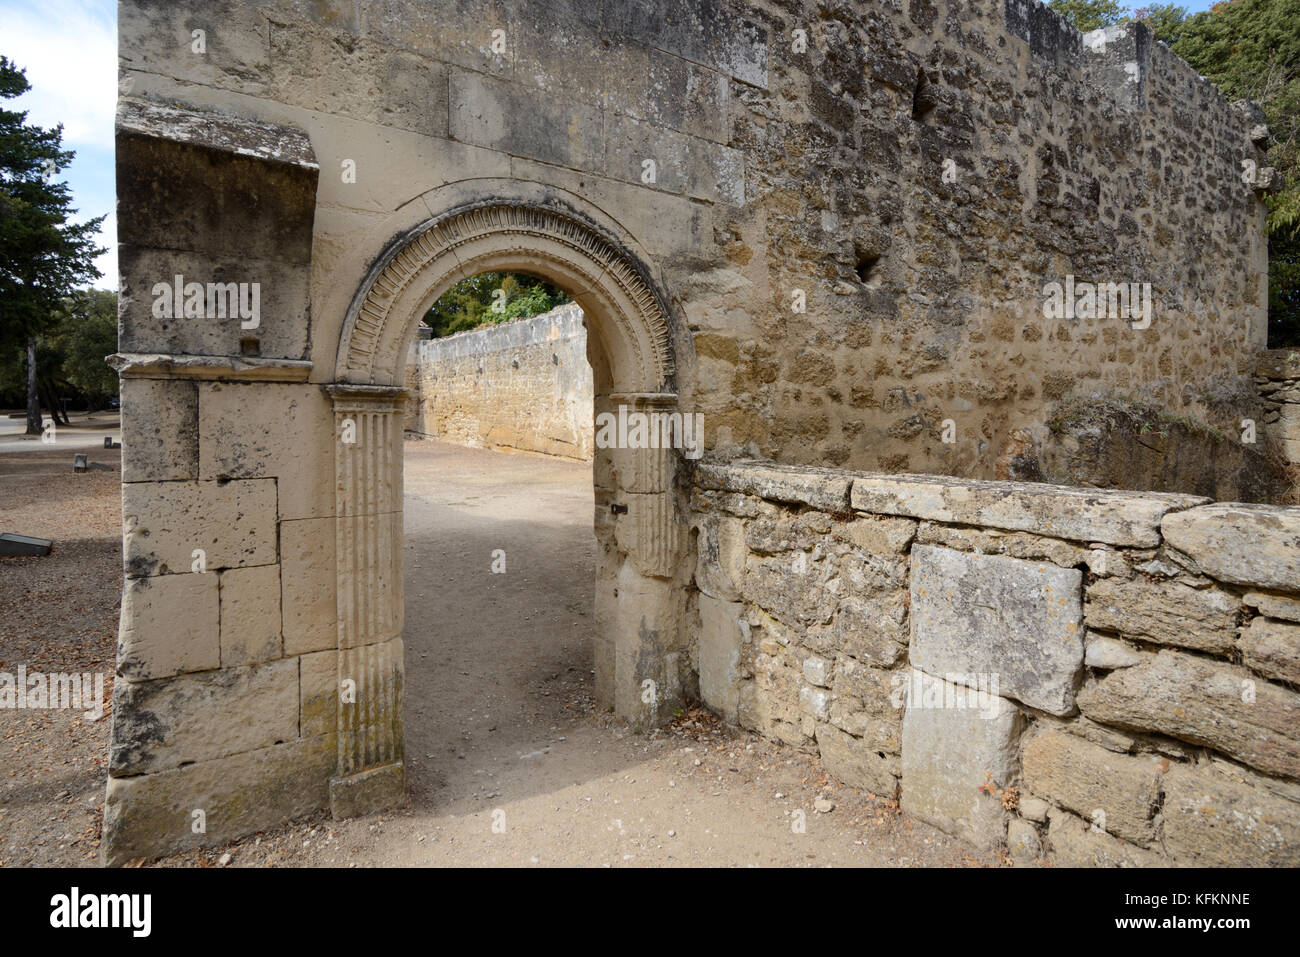 Entrance to Jeu de Paume Tennis Court (c16th) Suze-la-Rousse. Built so Charles IX could play in 1564. One of few courts still surviving in France. Stock Photo